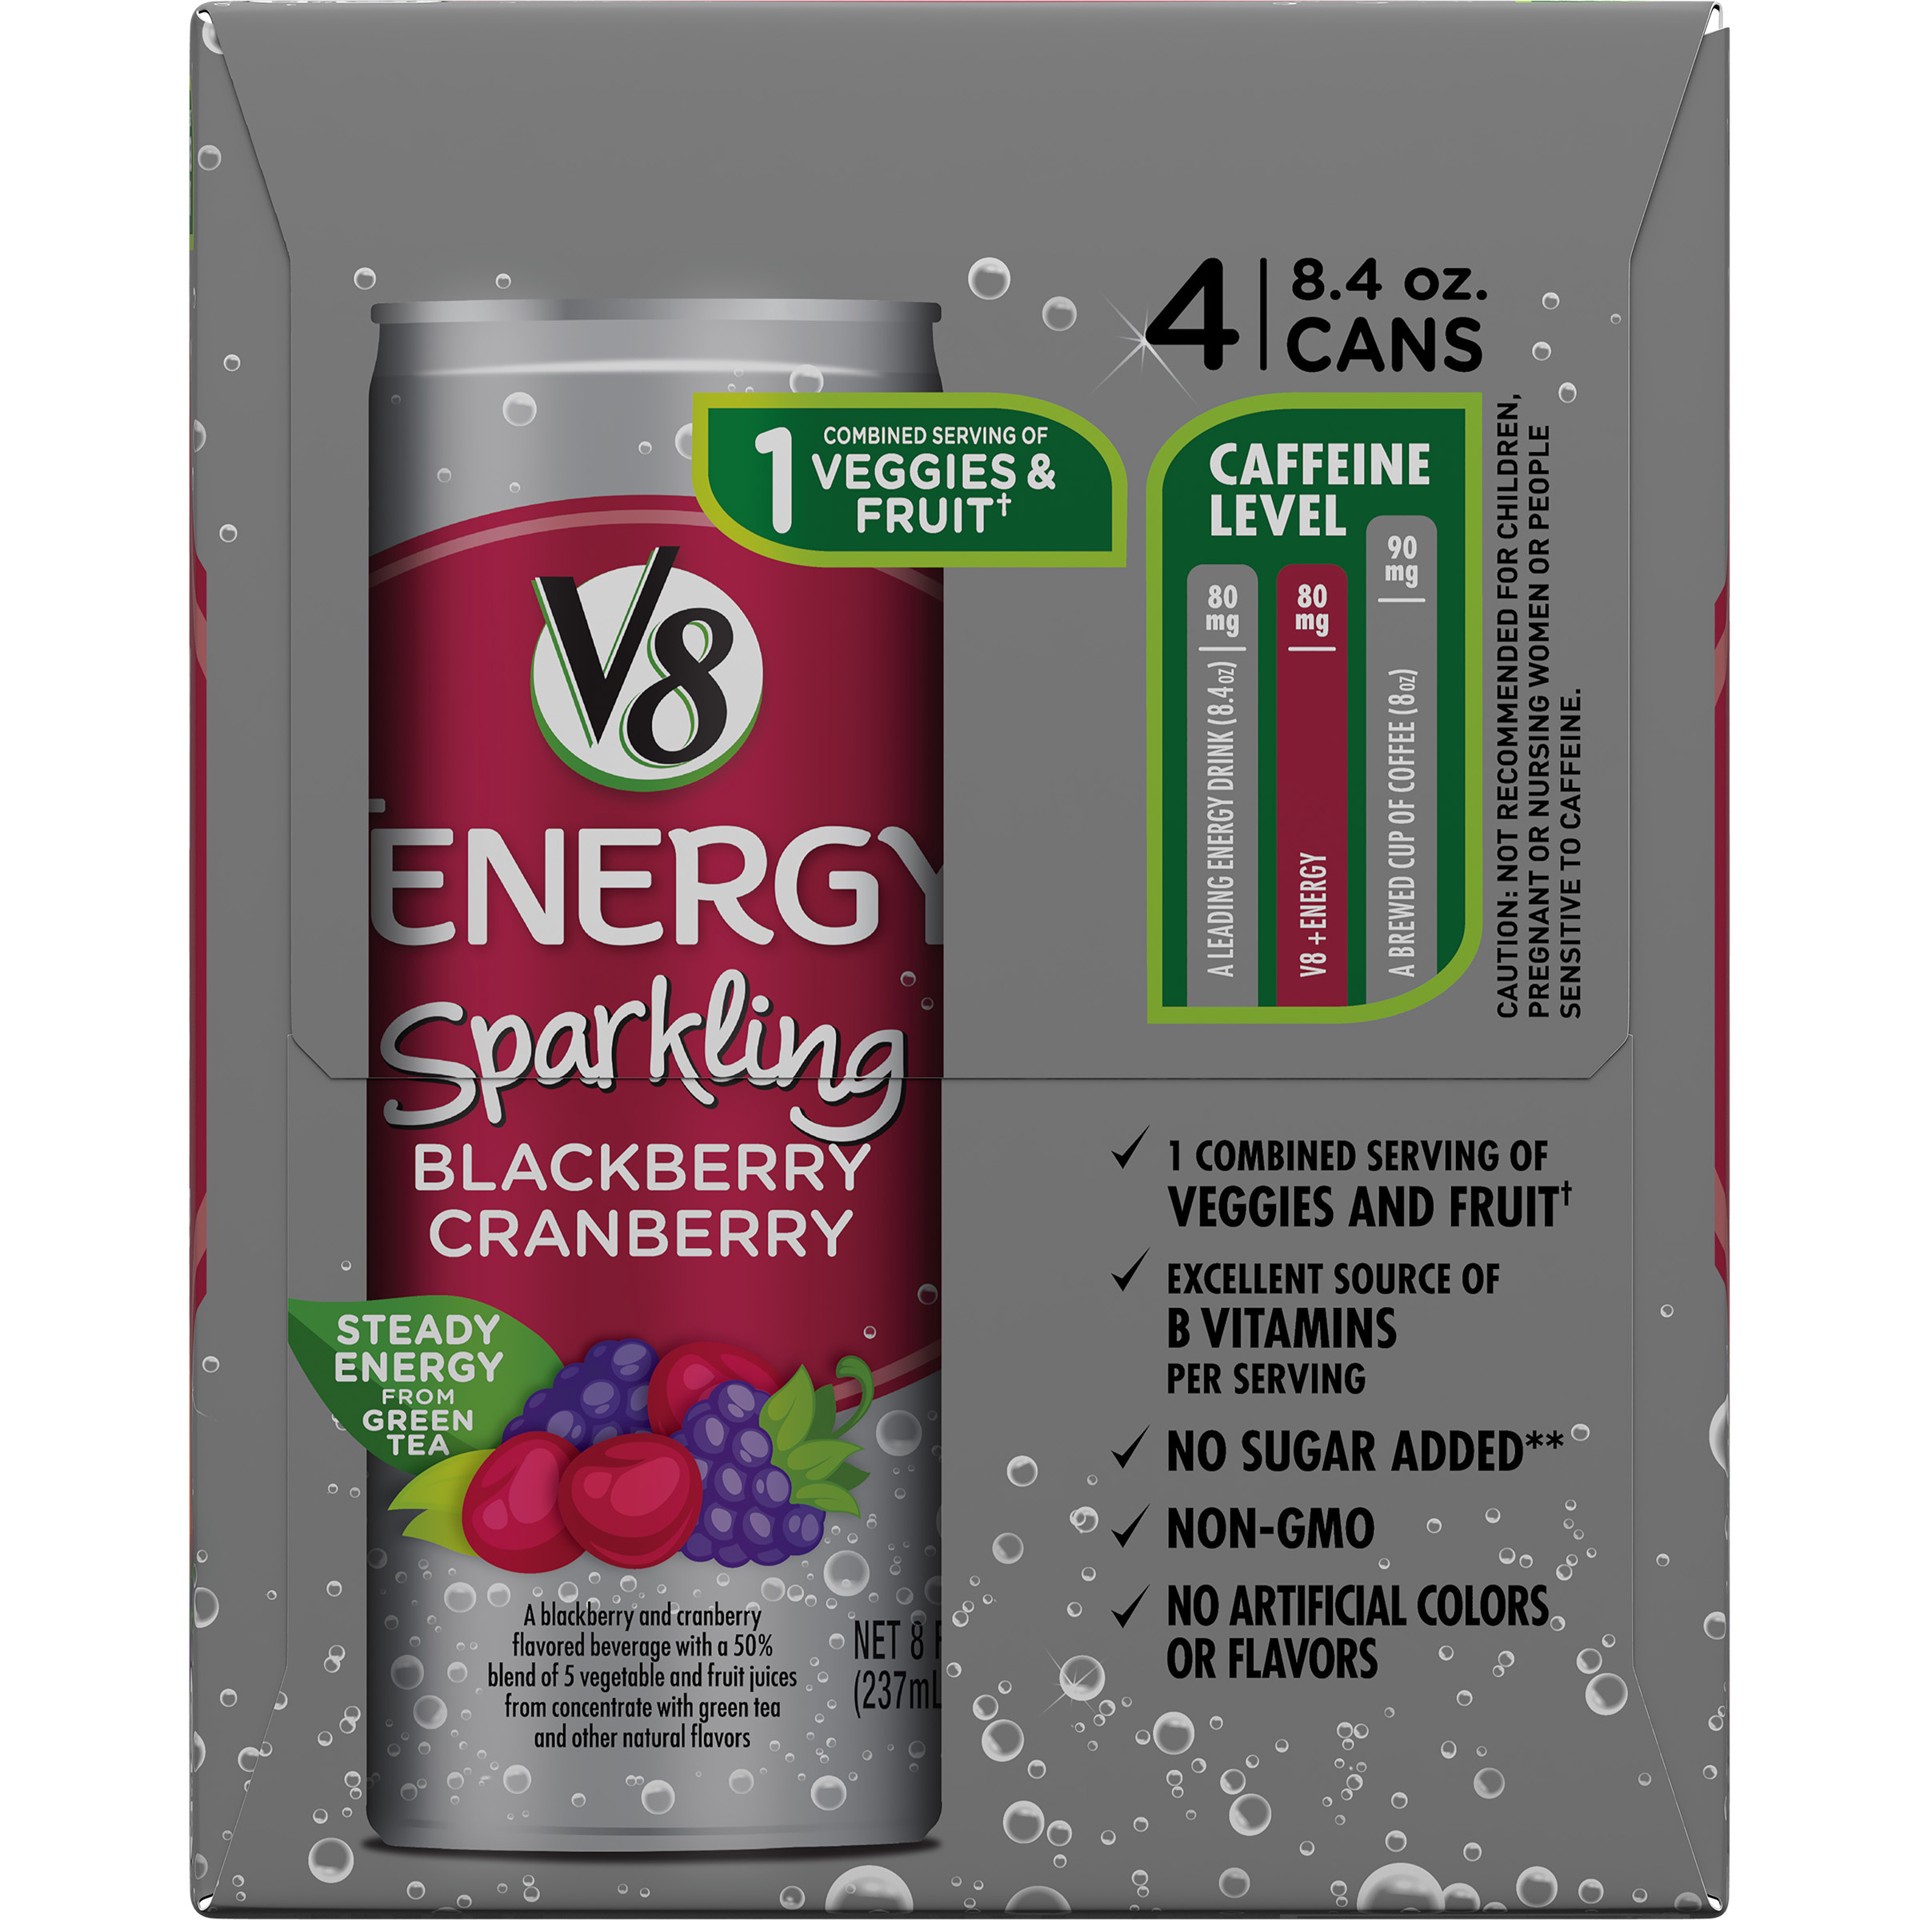 slide 5 of 5, V8 +Energy Sparkling Healthy Energy Drink, Natural Energy from Tea, Blackberry Cranberry, 8.4 Ounce Can (4 Count), 33.6 oz